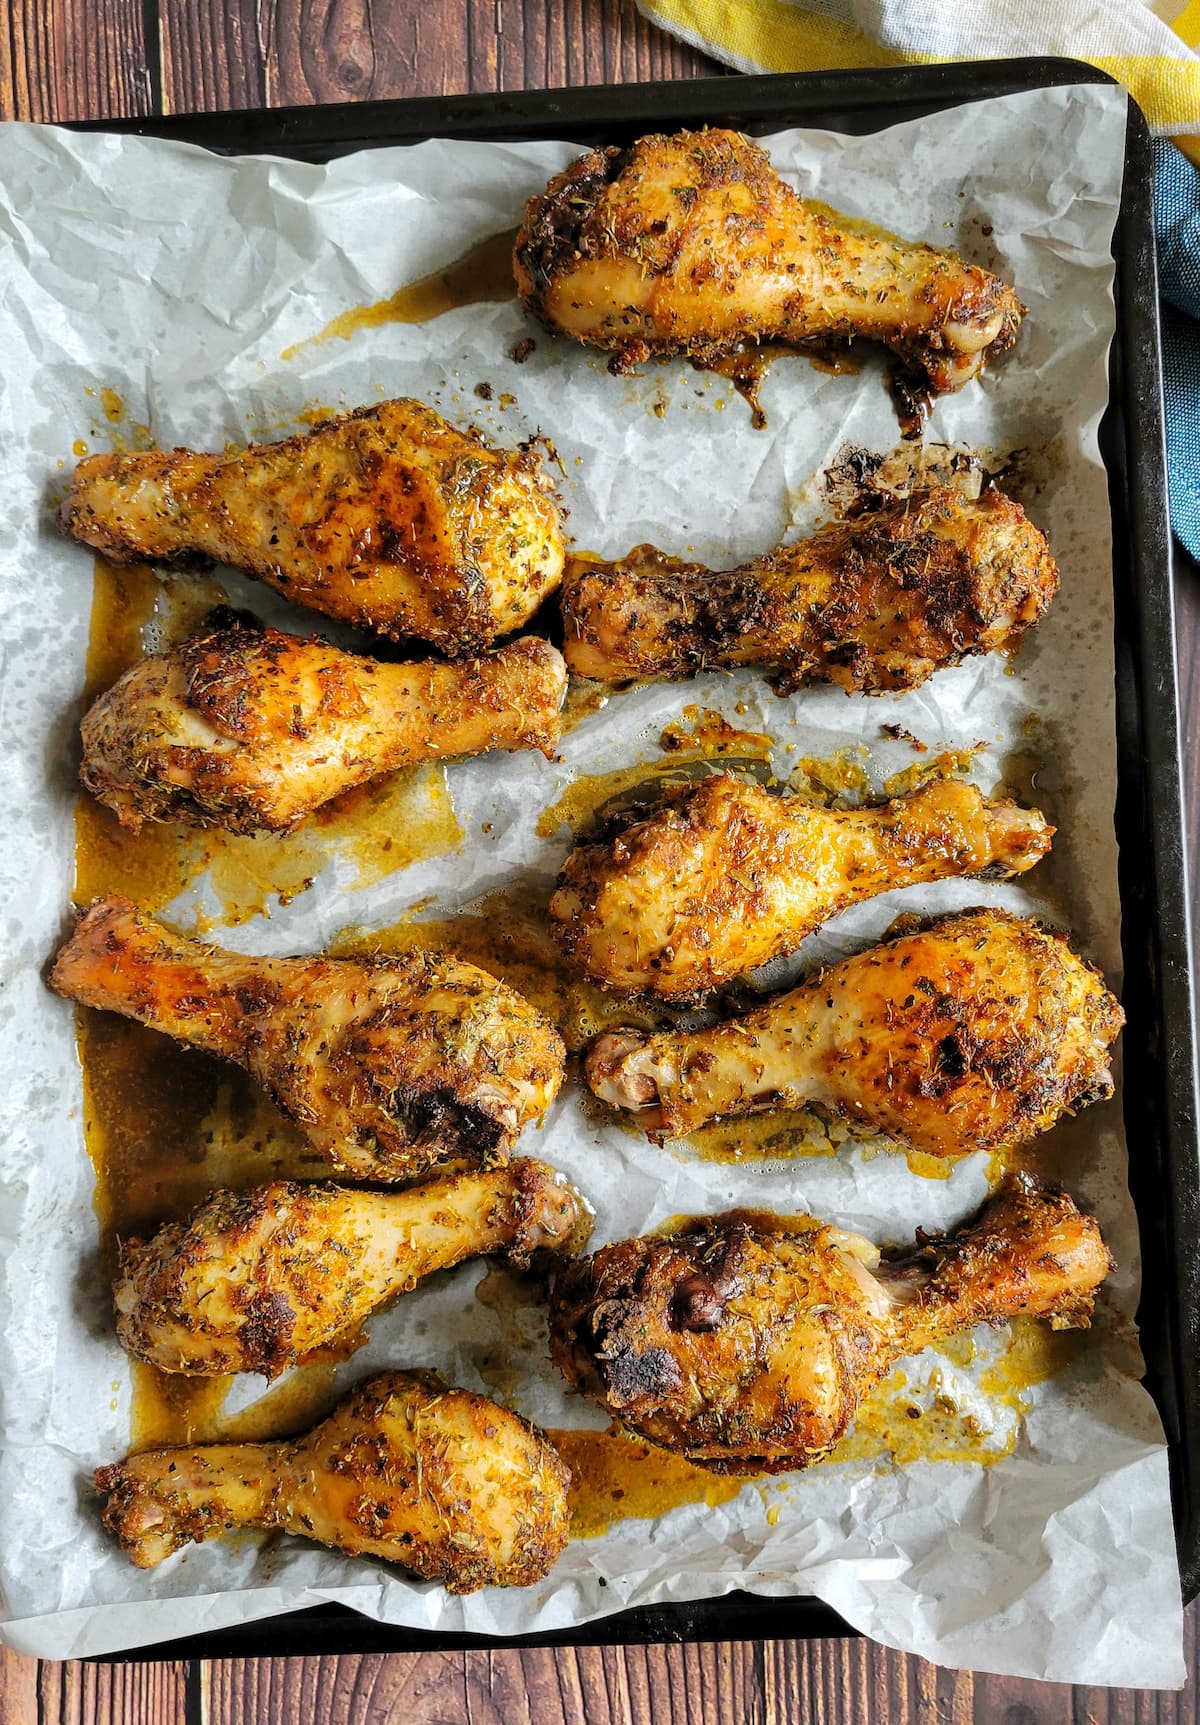 cooked chicken drumsticks on a parchment lined baking tray